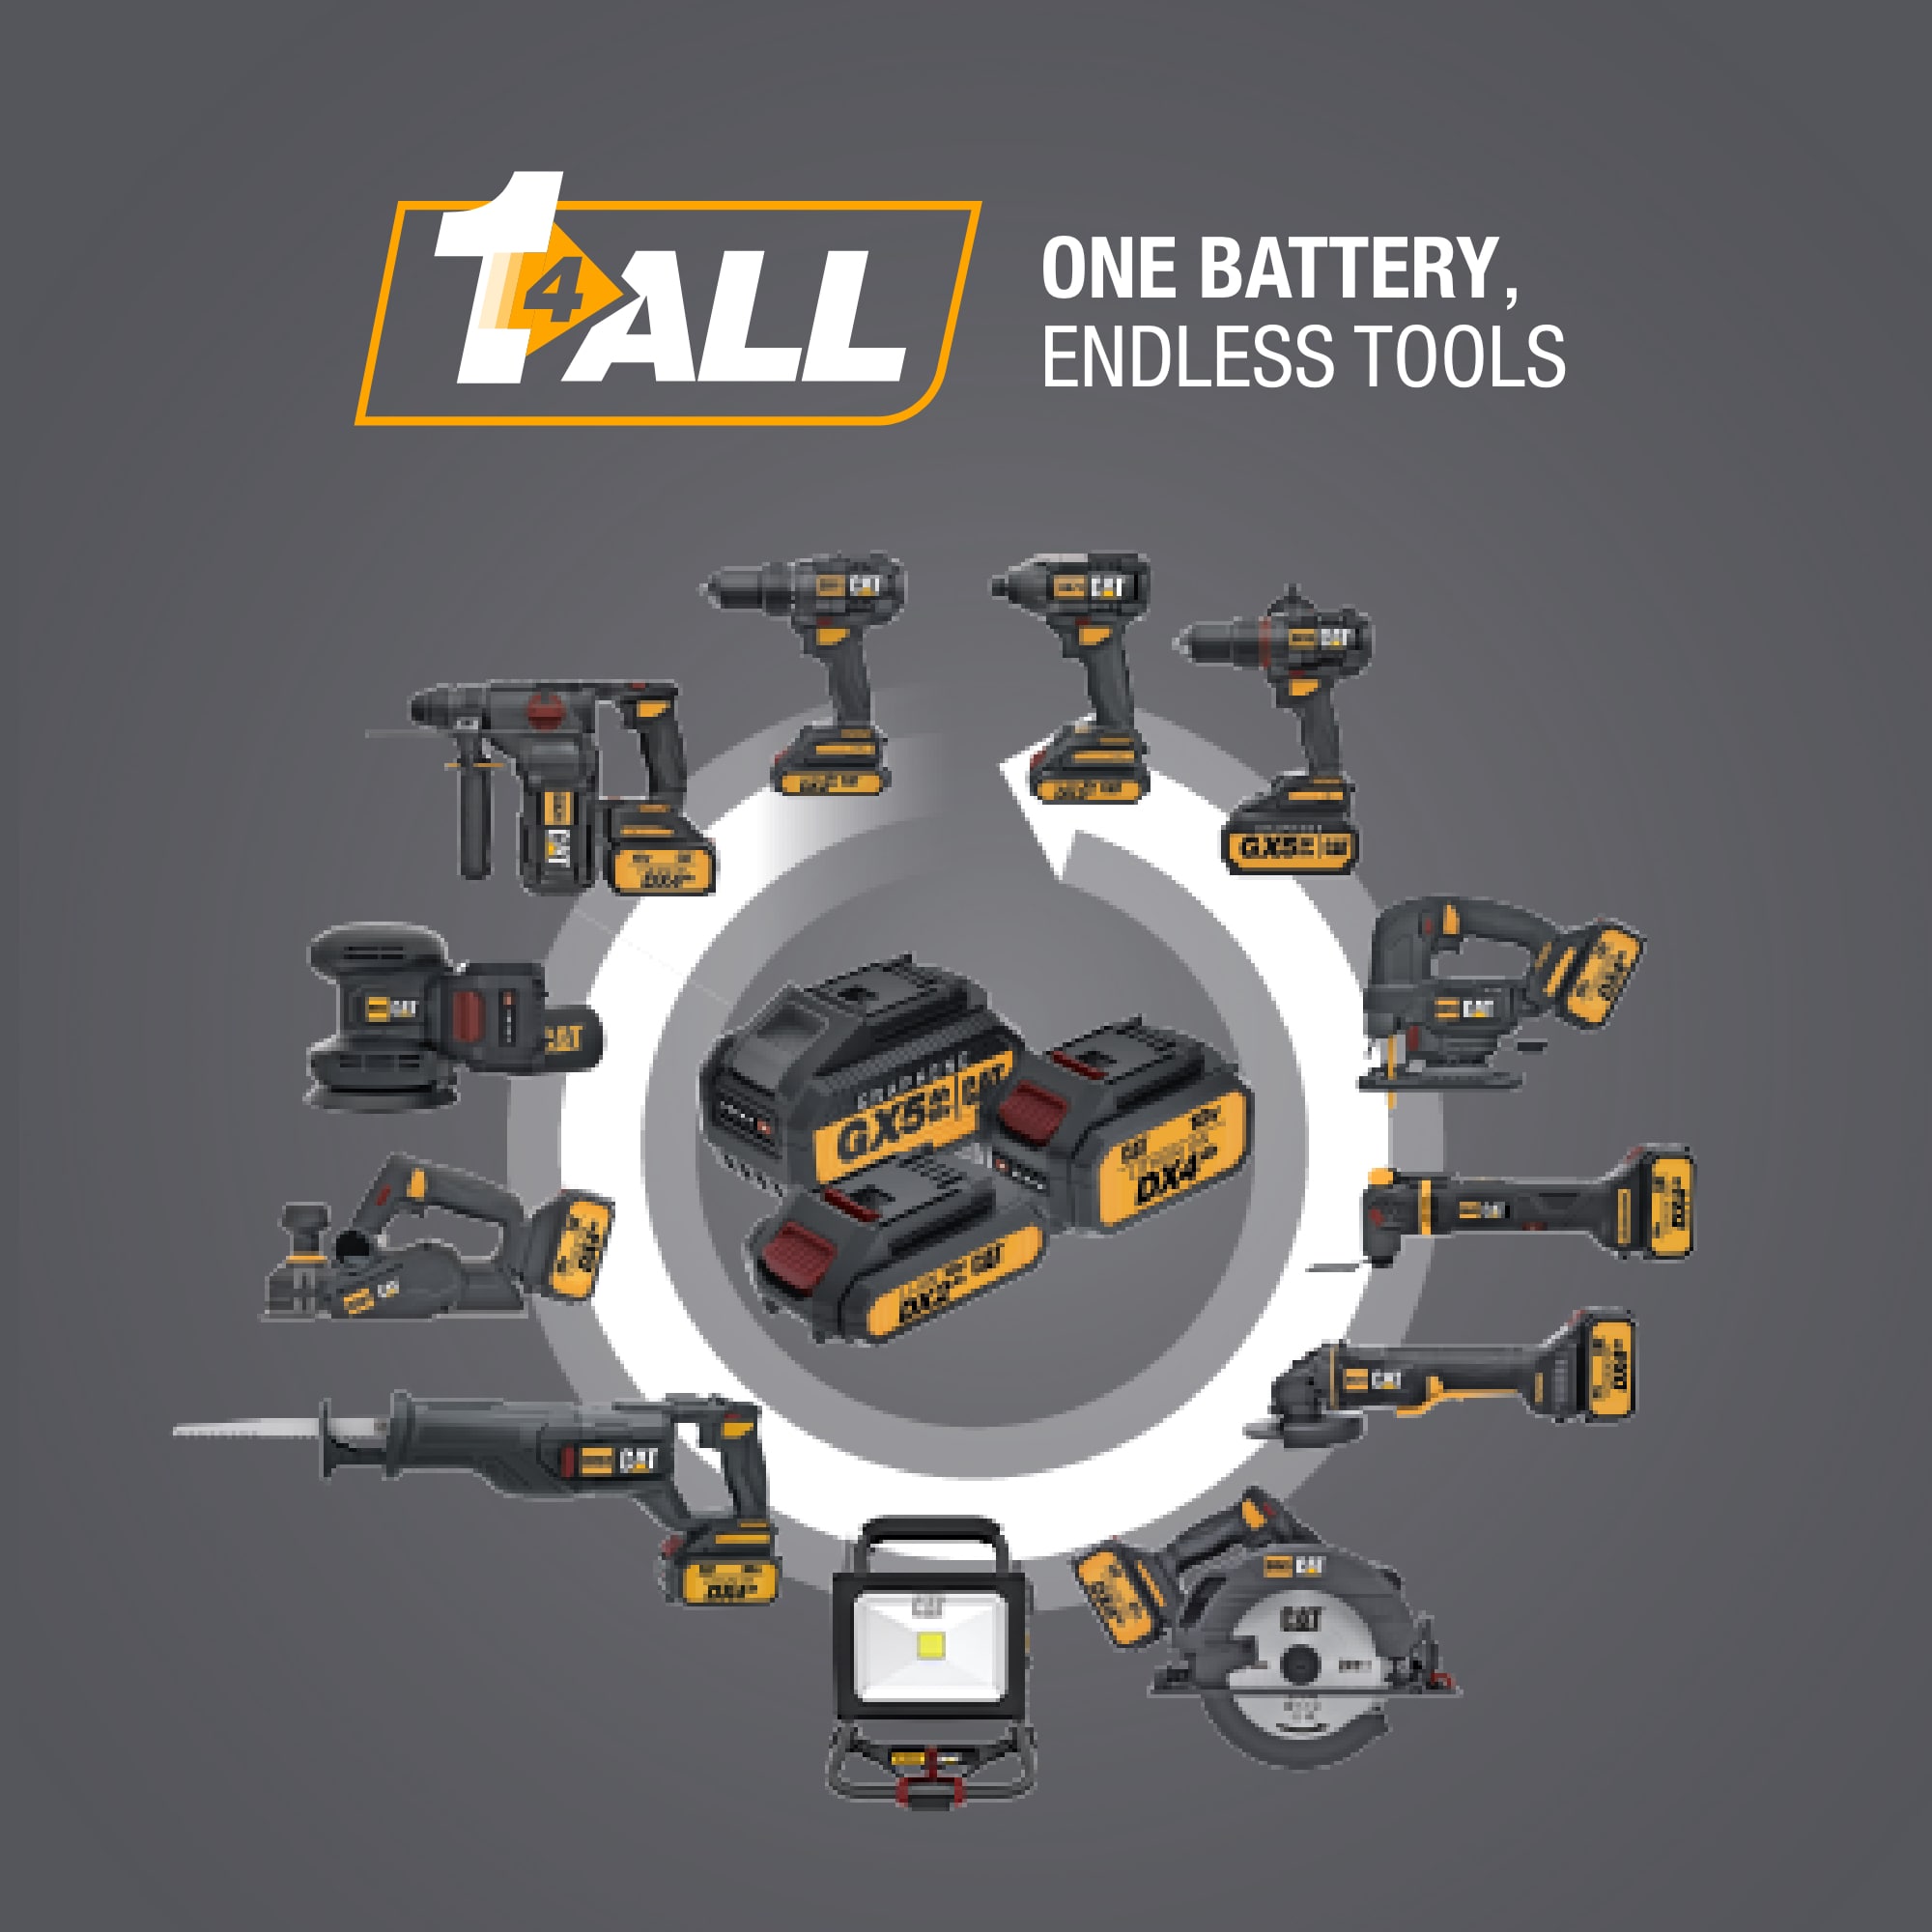 Cat 18 Specialty Battery in the Power Tool Batteries  Chargers department  at